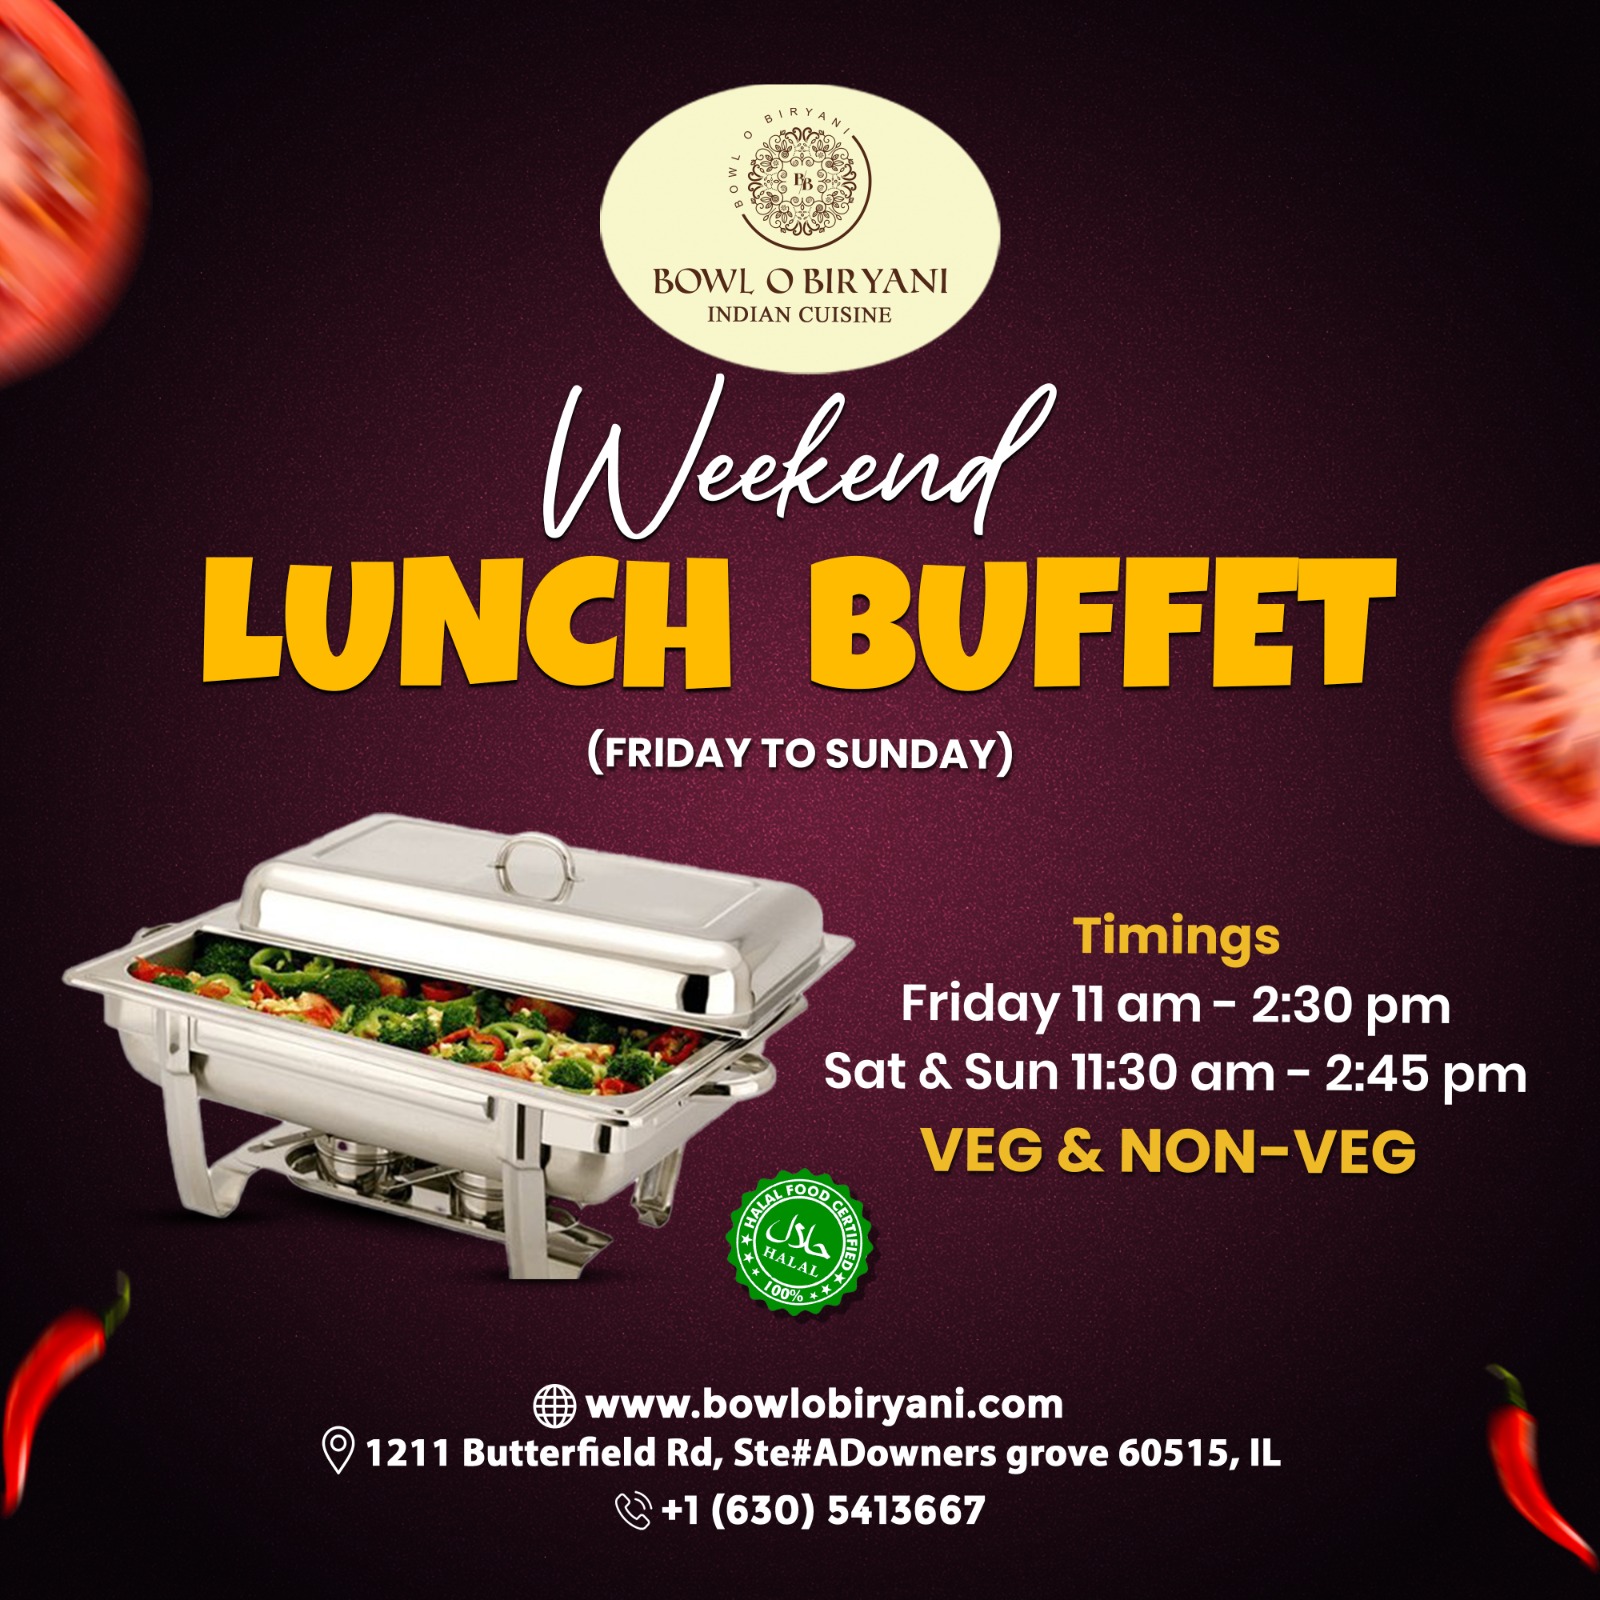 Experience the joy of a delightful Weekend Lunch Buffet